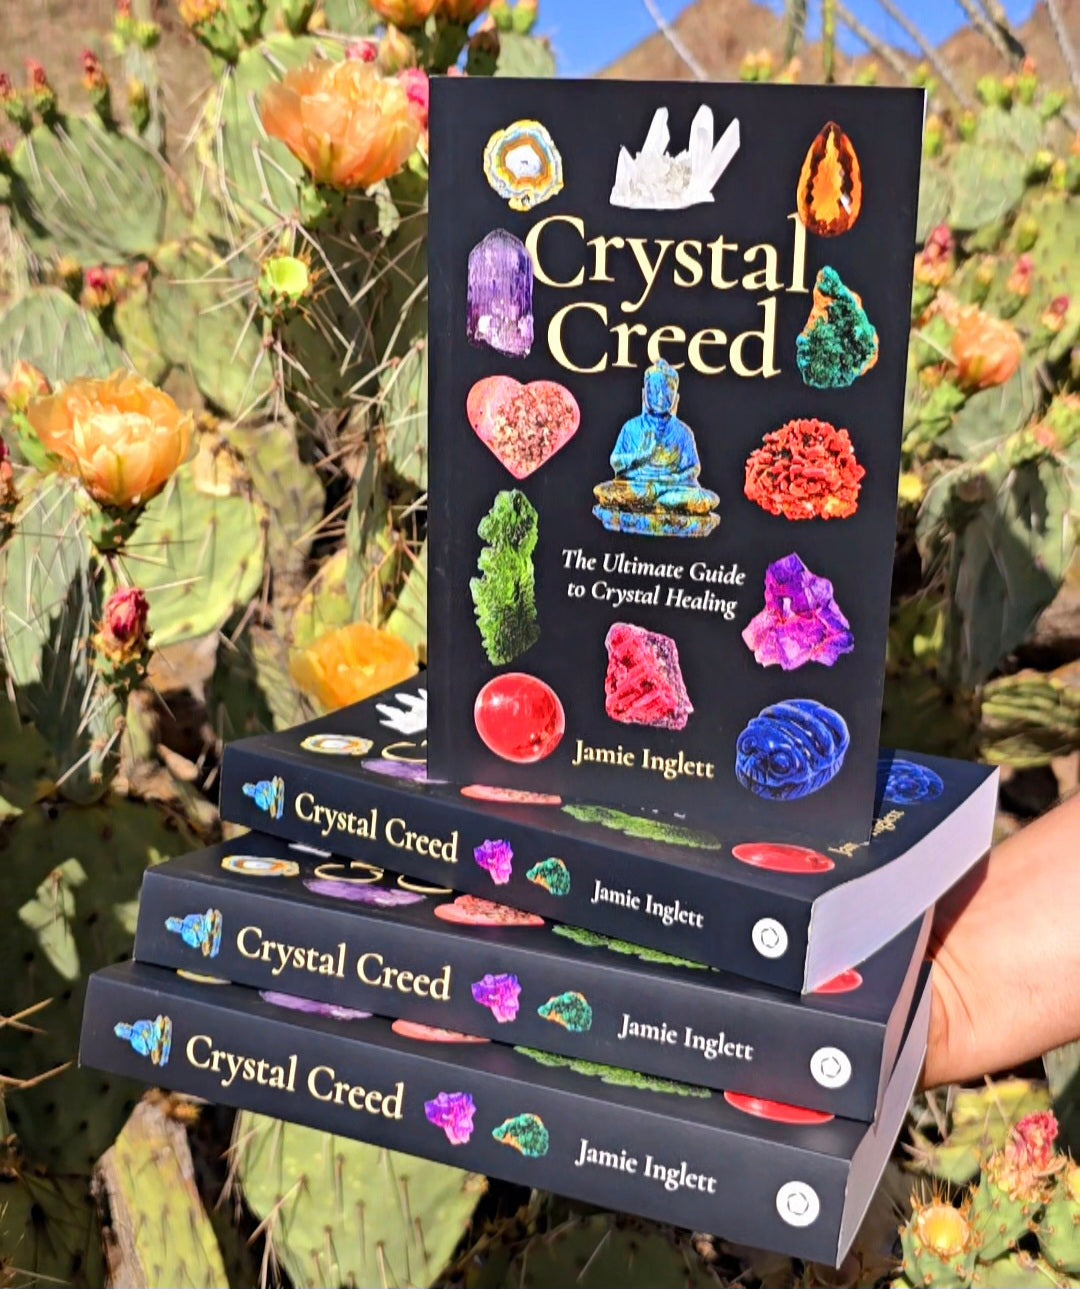 Crystal Creed: The Ultimate Guide to Crystal Healing by Jamie Inglett